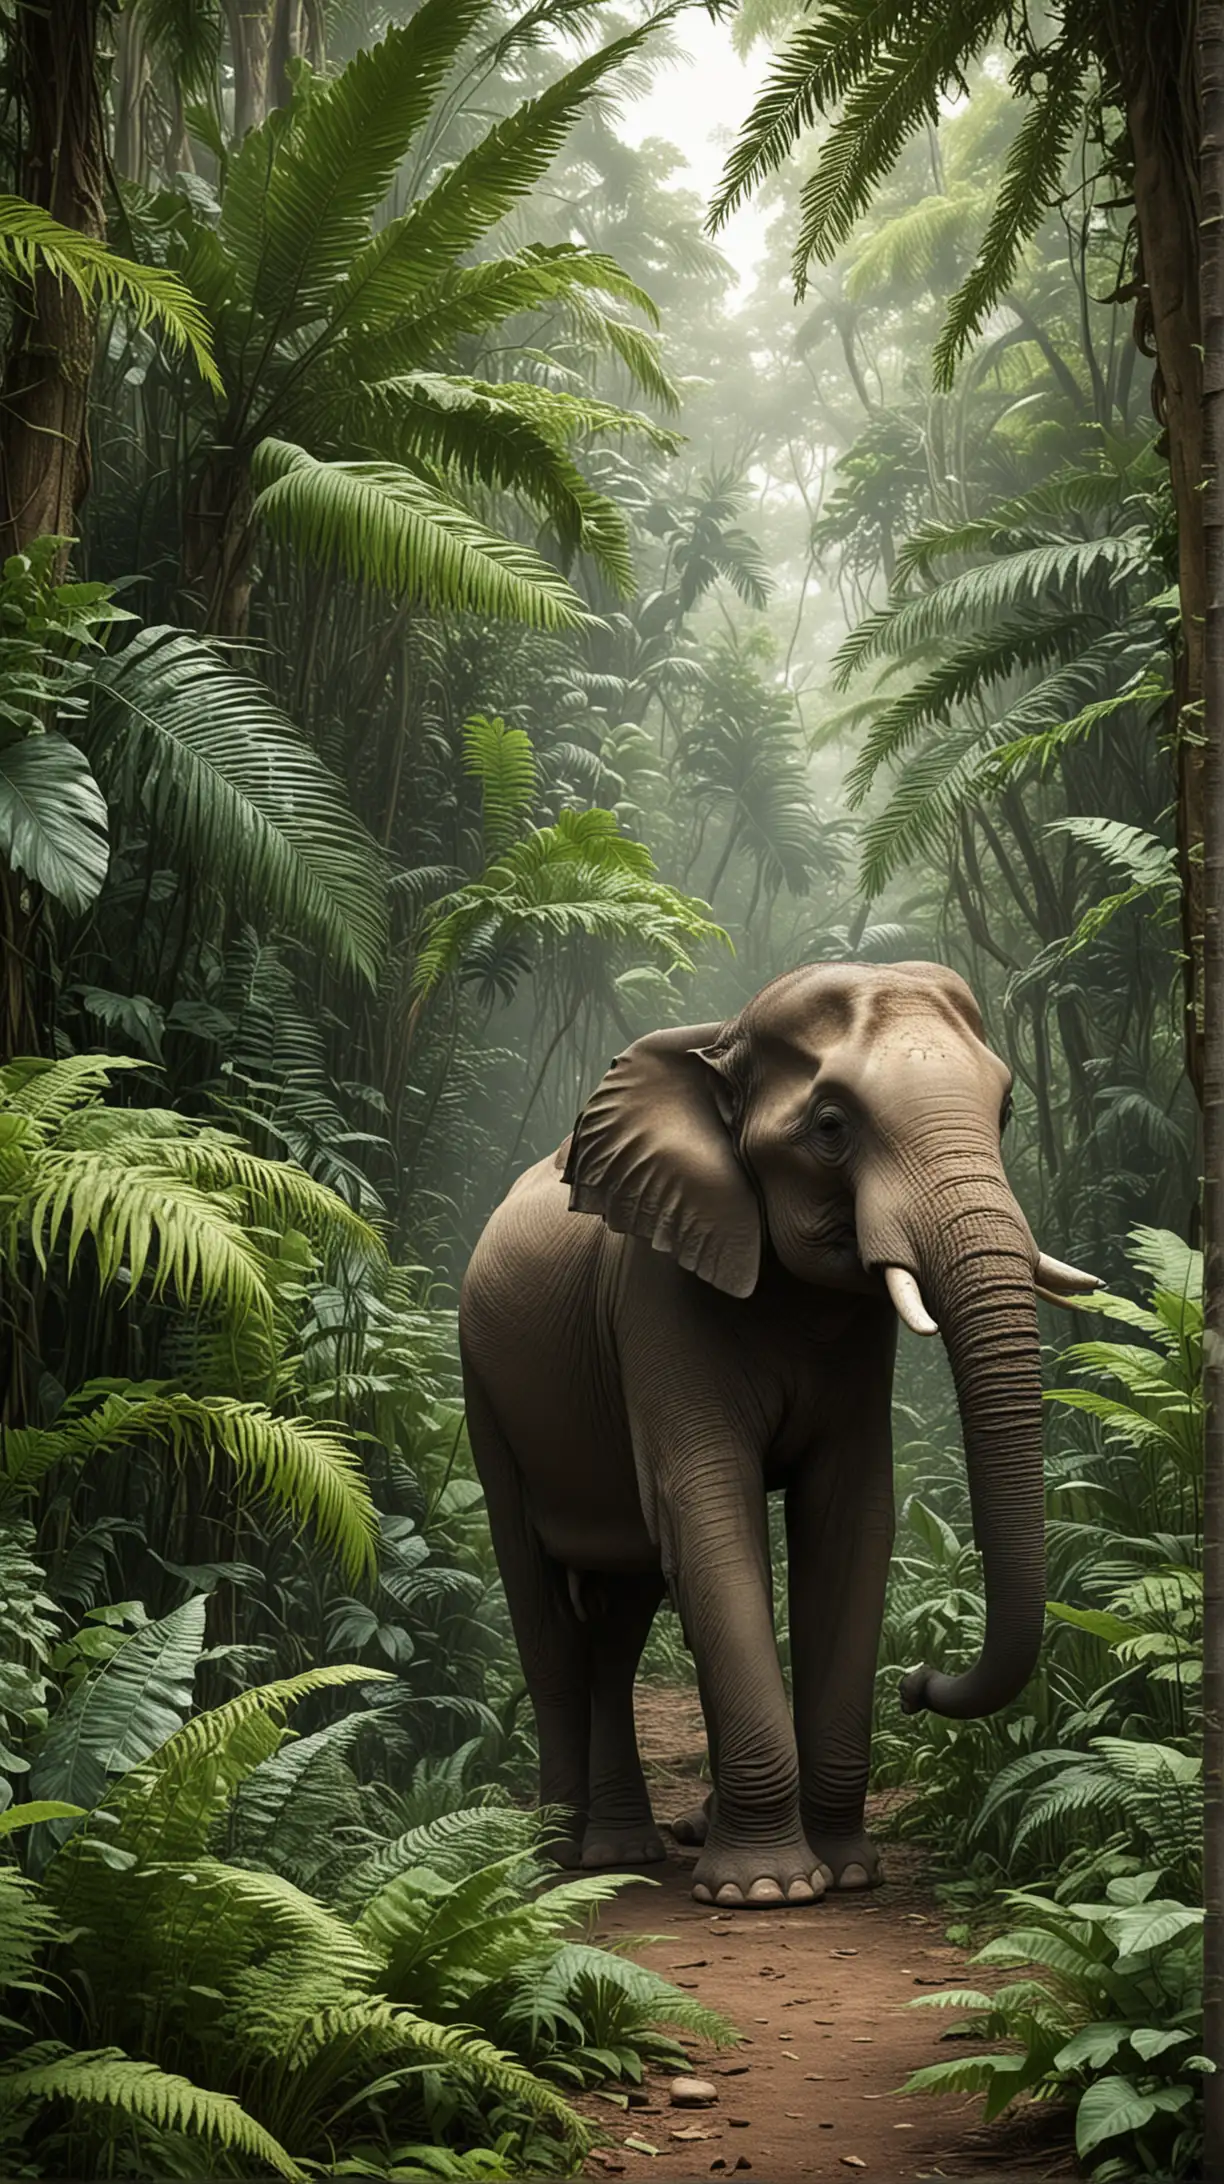 Tropical Jungle Scene with Ferns and Side View of an Elephant